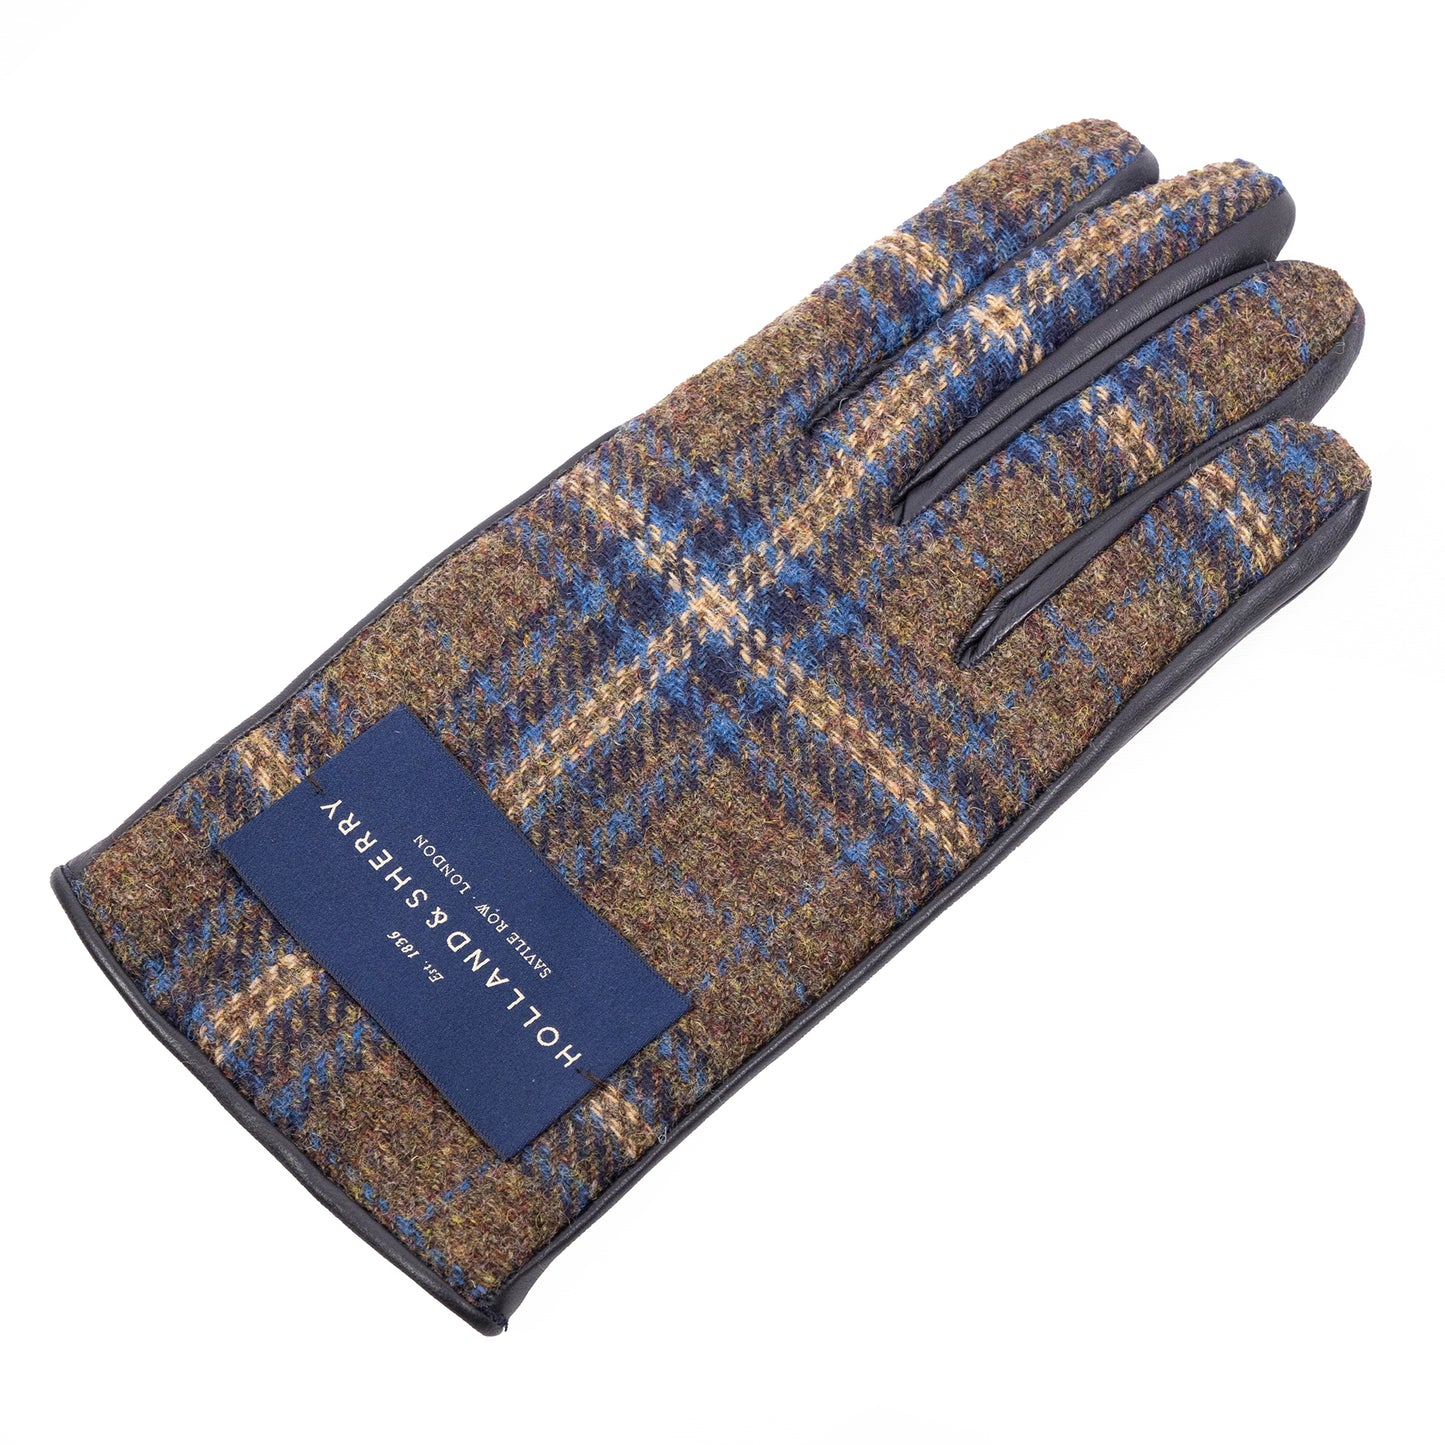 Bespoke Men's nappa touch leather gloves and Holland&Sherry wool top